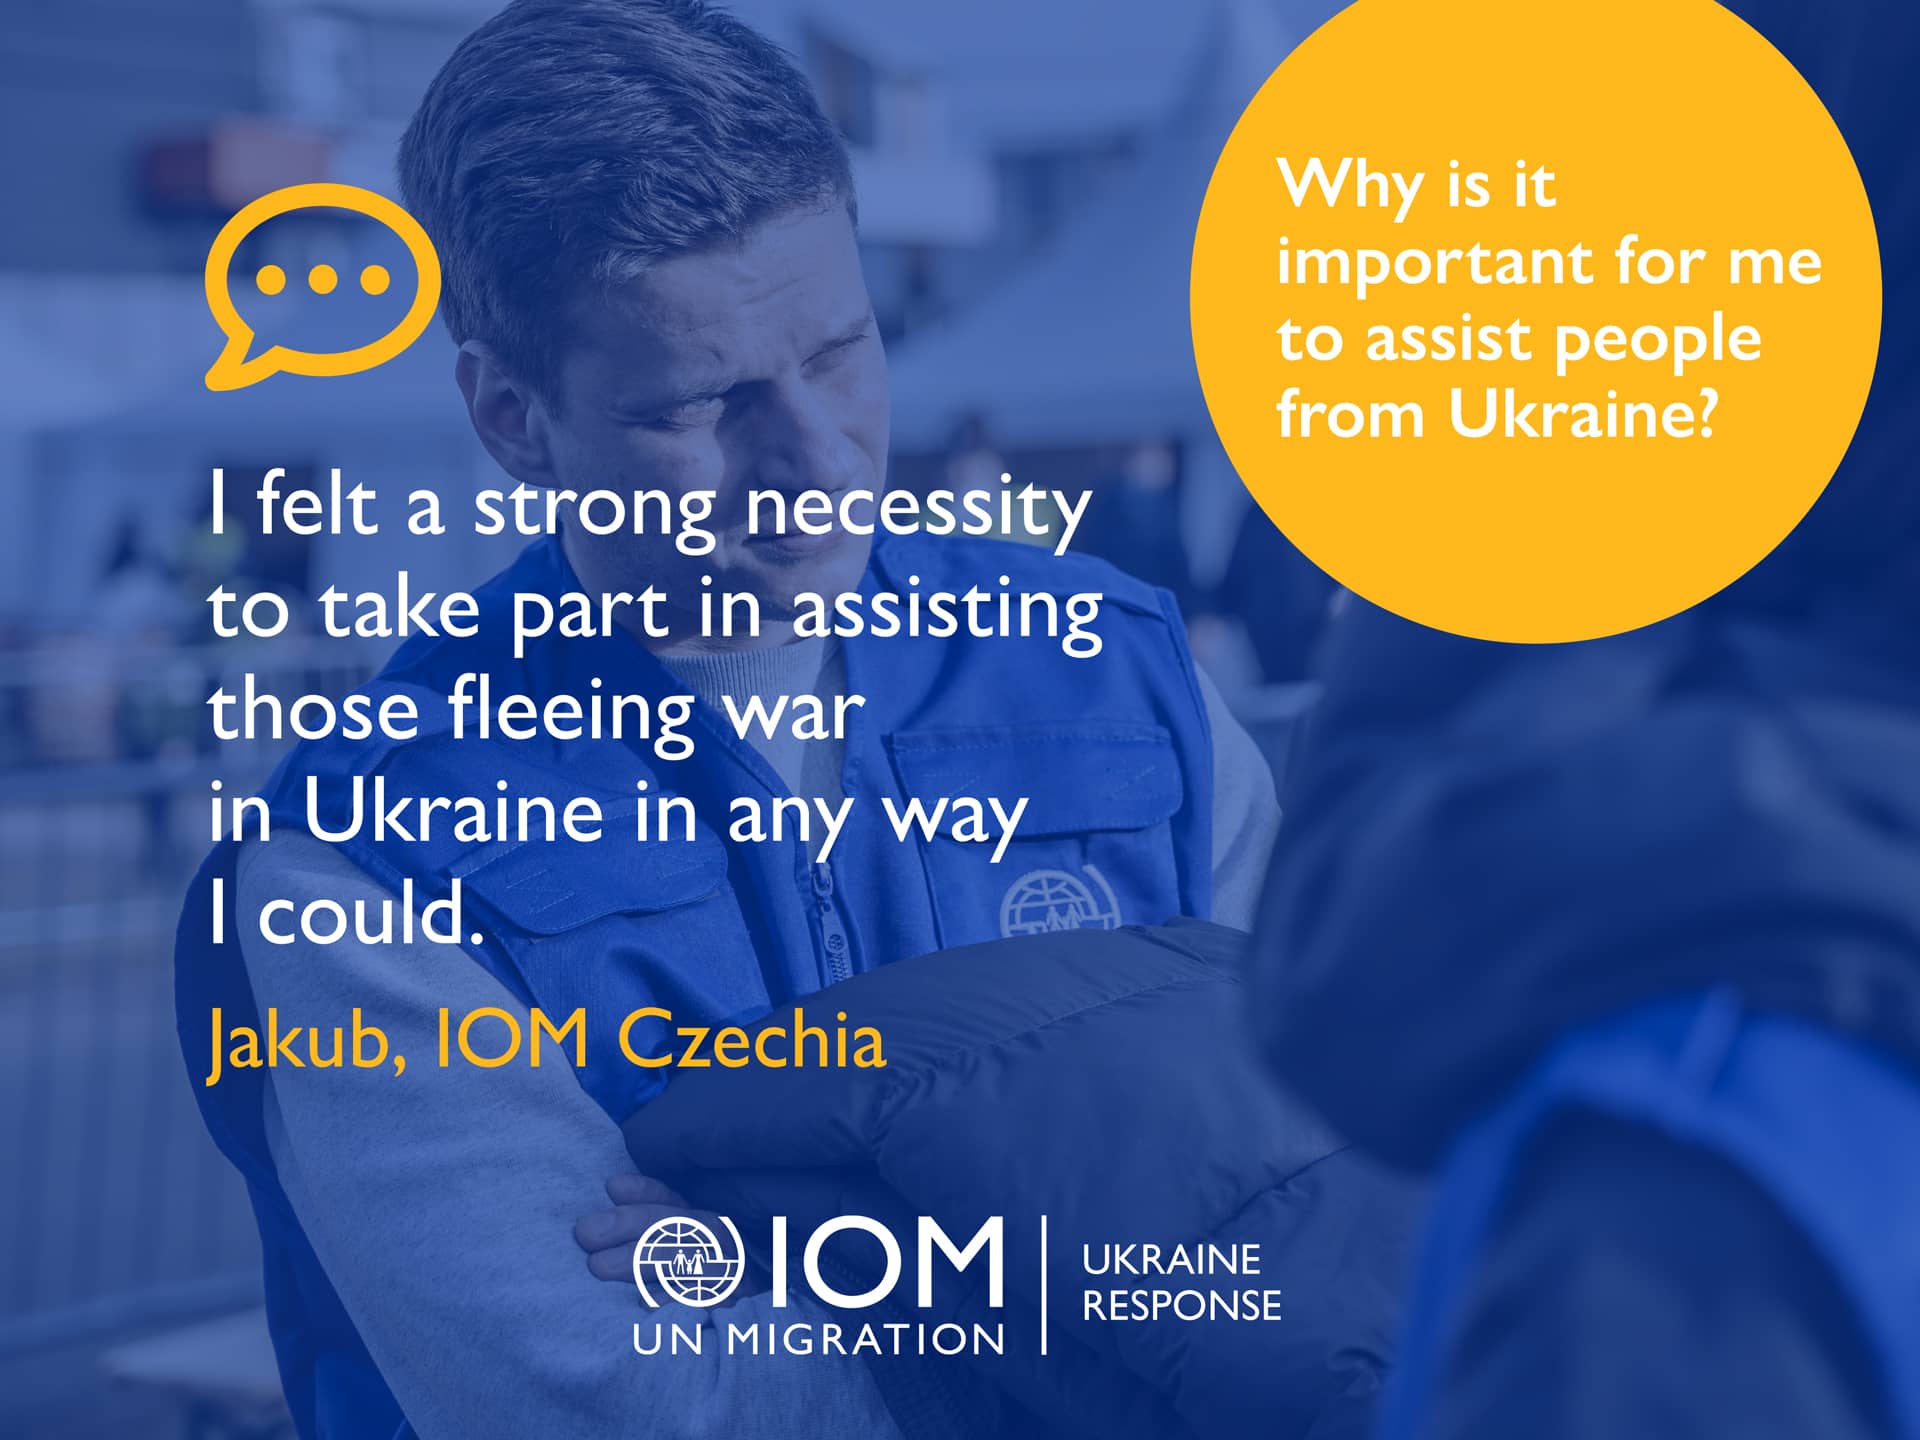 Jakub, IOM Czechia - Why is it important for me to assist people from Ukraine